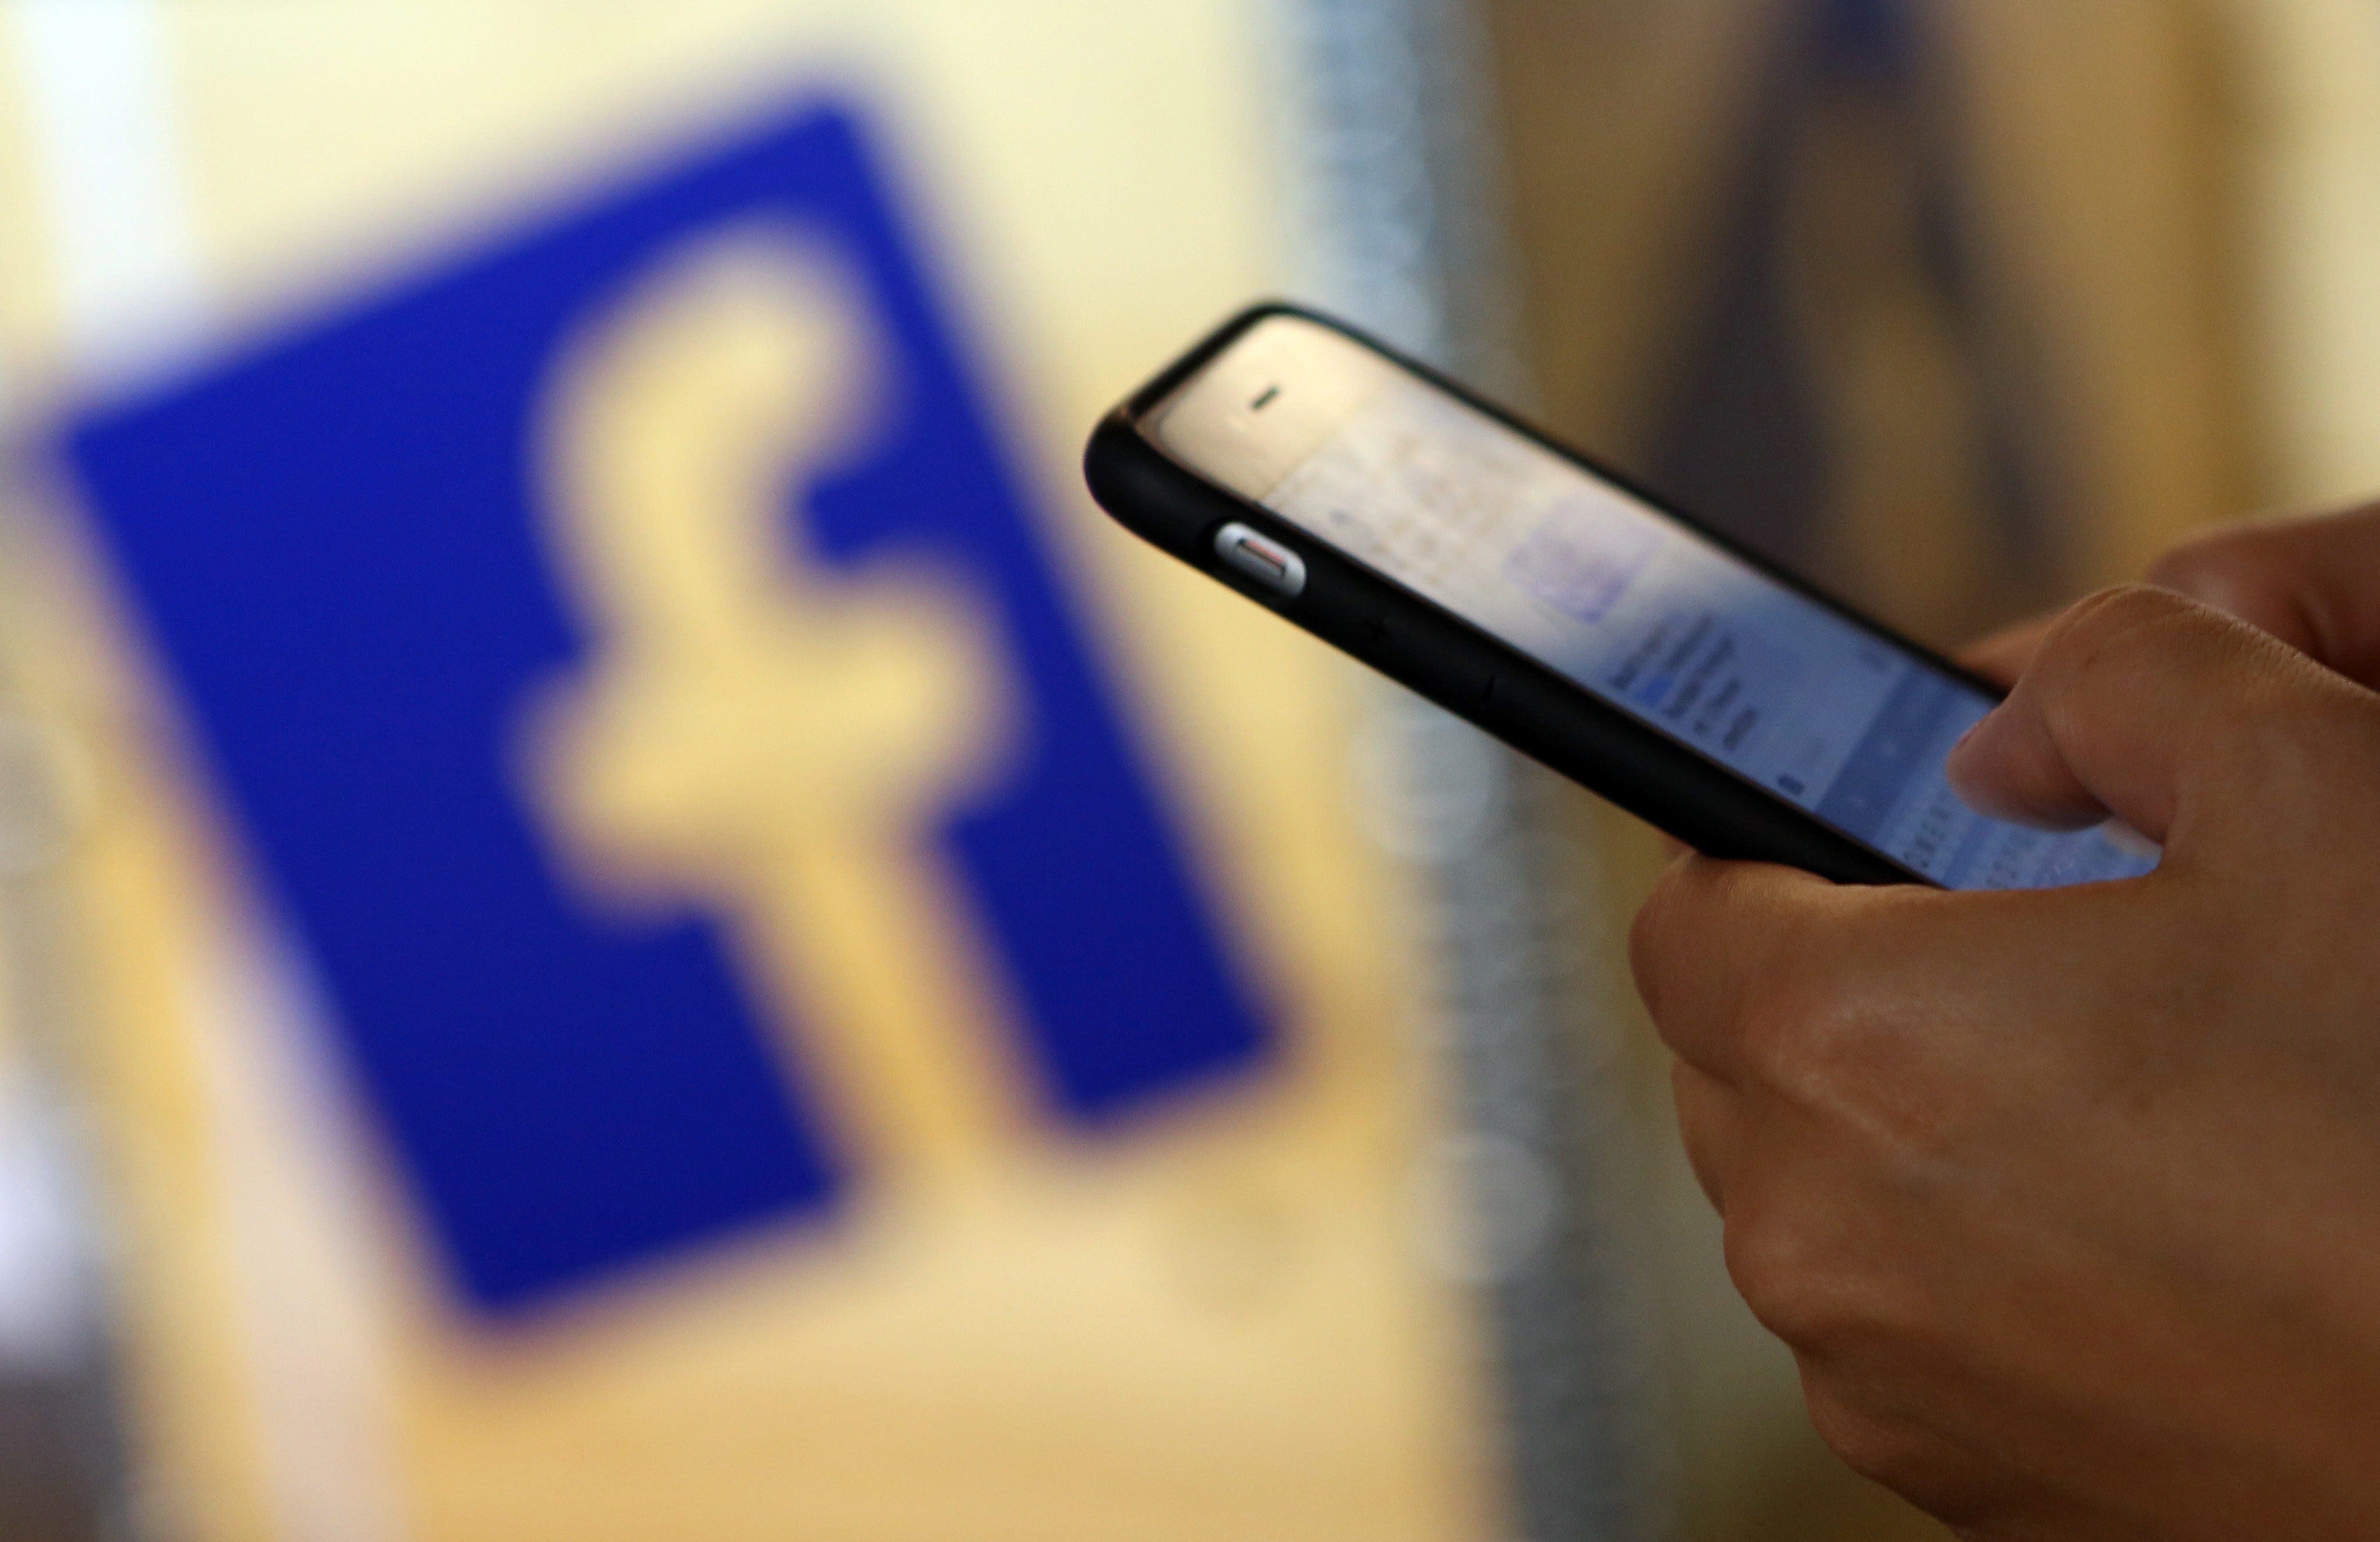 A person uses a mobile phone in front of the Facebook logo on Sept. 12, 2015 in Berlin, Germany. (Adam Berry—Getty Images)